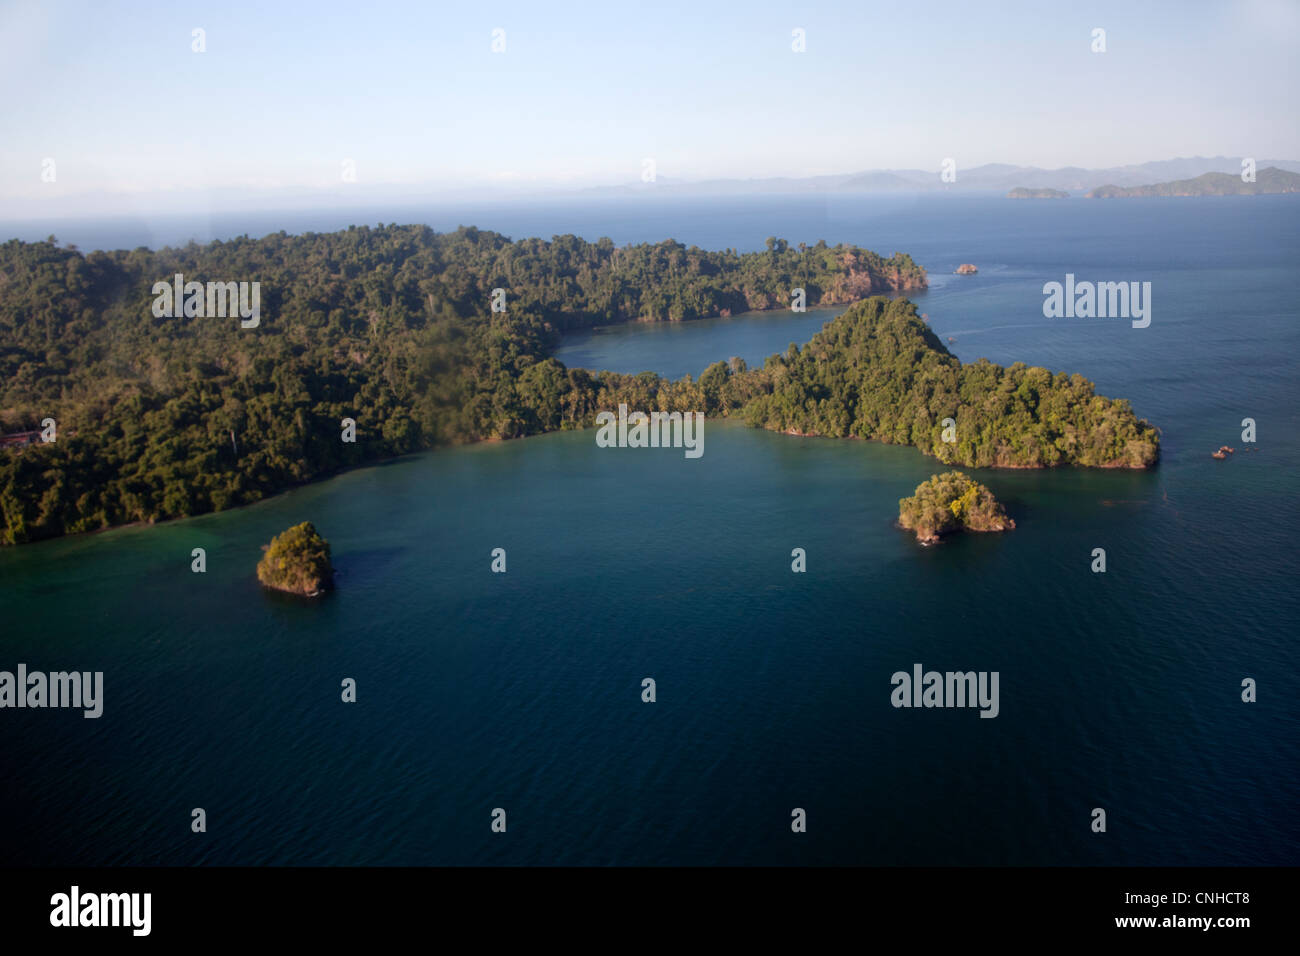 An aerial view of Coiba, the largest island in Central America off the coast of Panama. Stock Photo